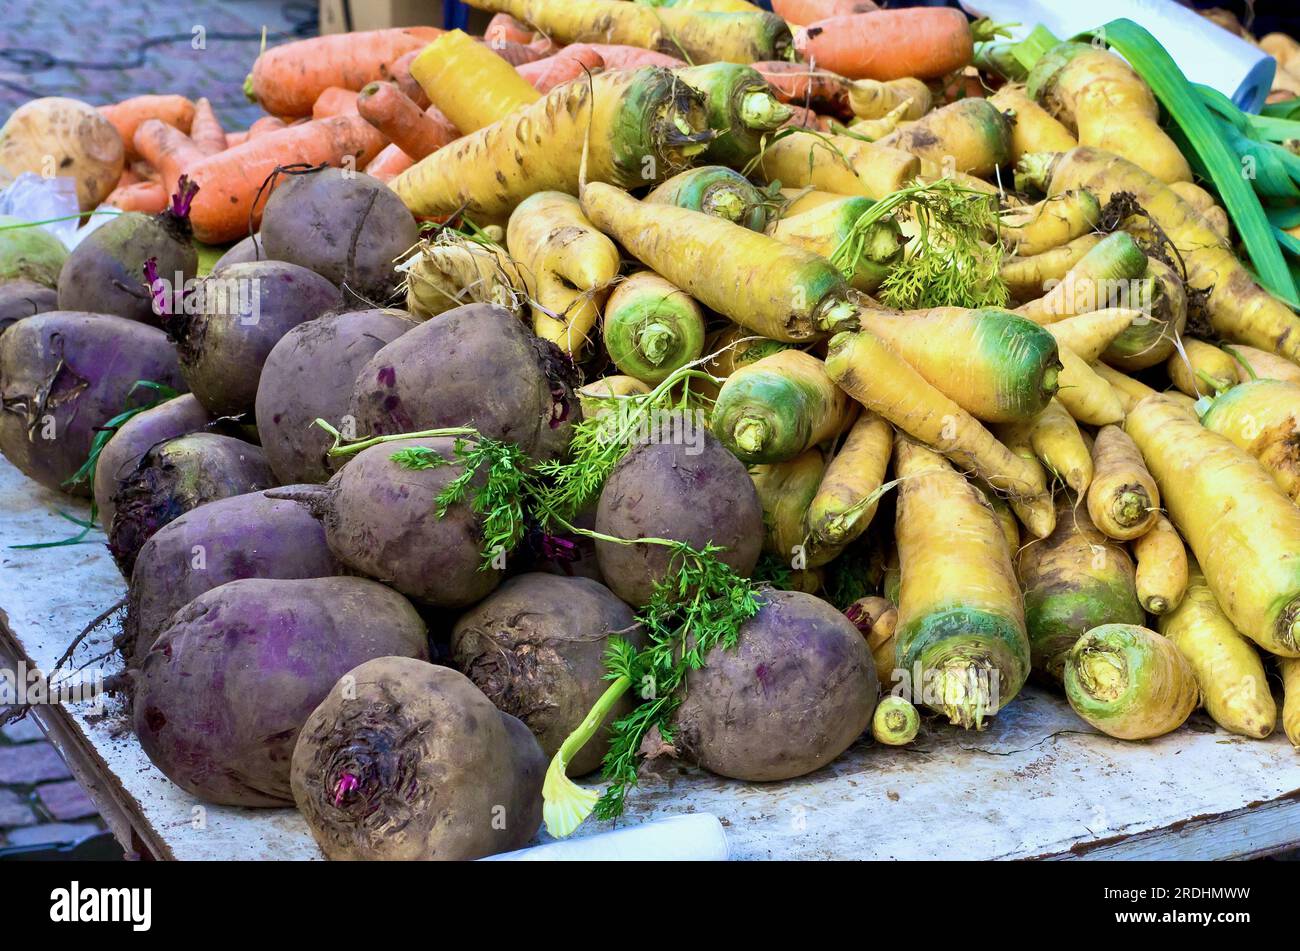 Root vegetables for sale at farmers market. Stock Photo